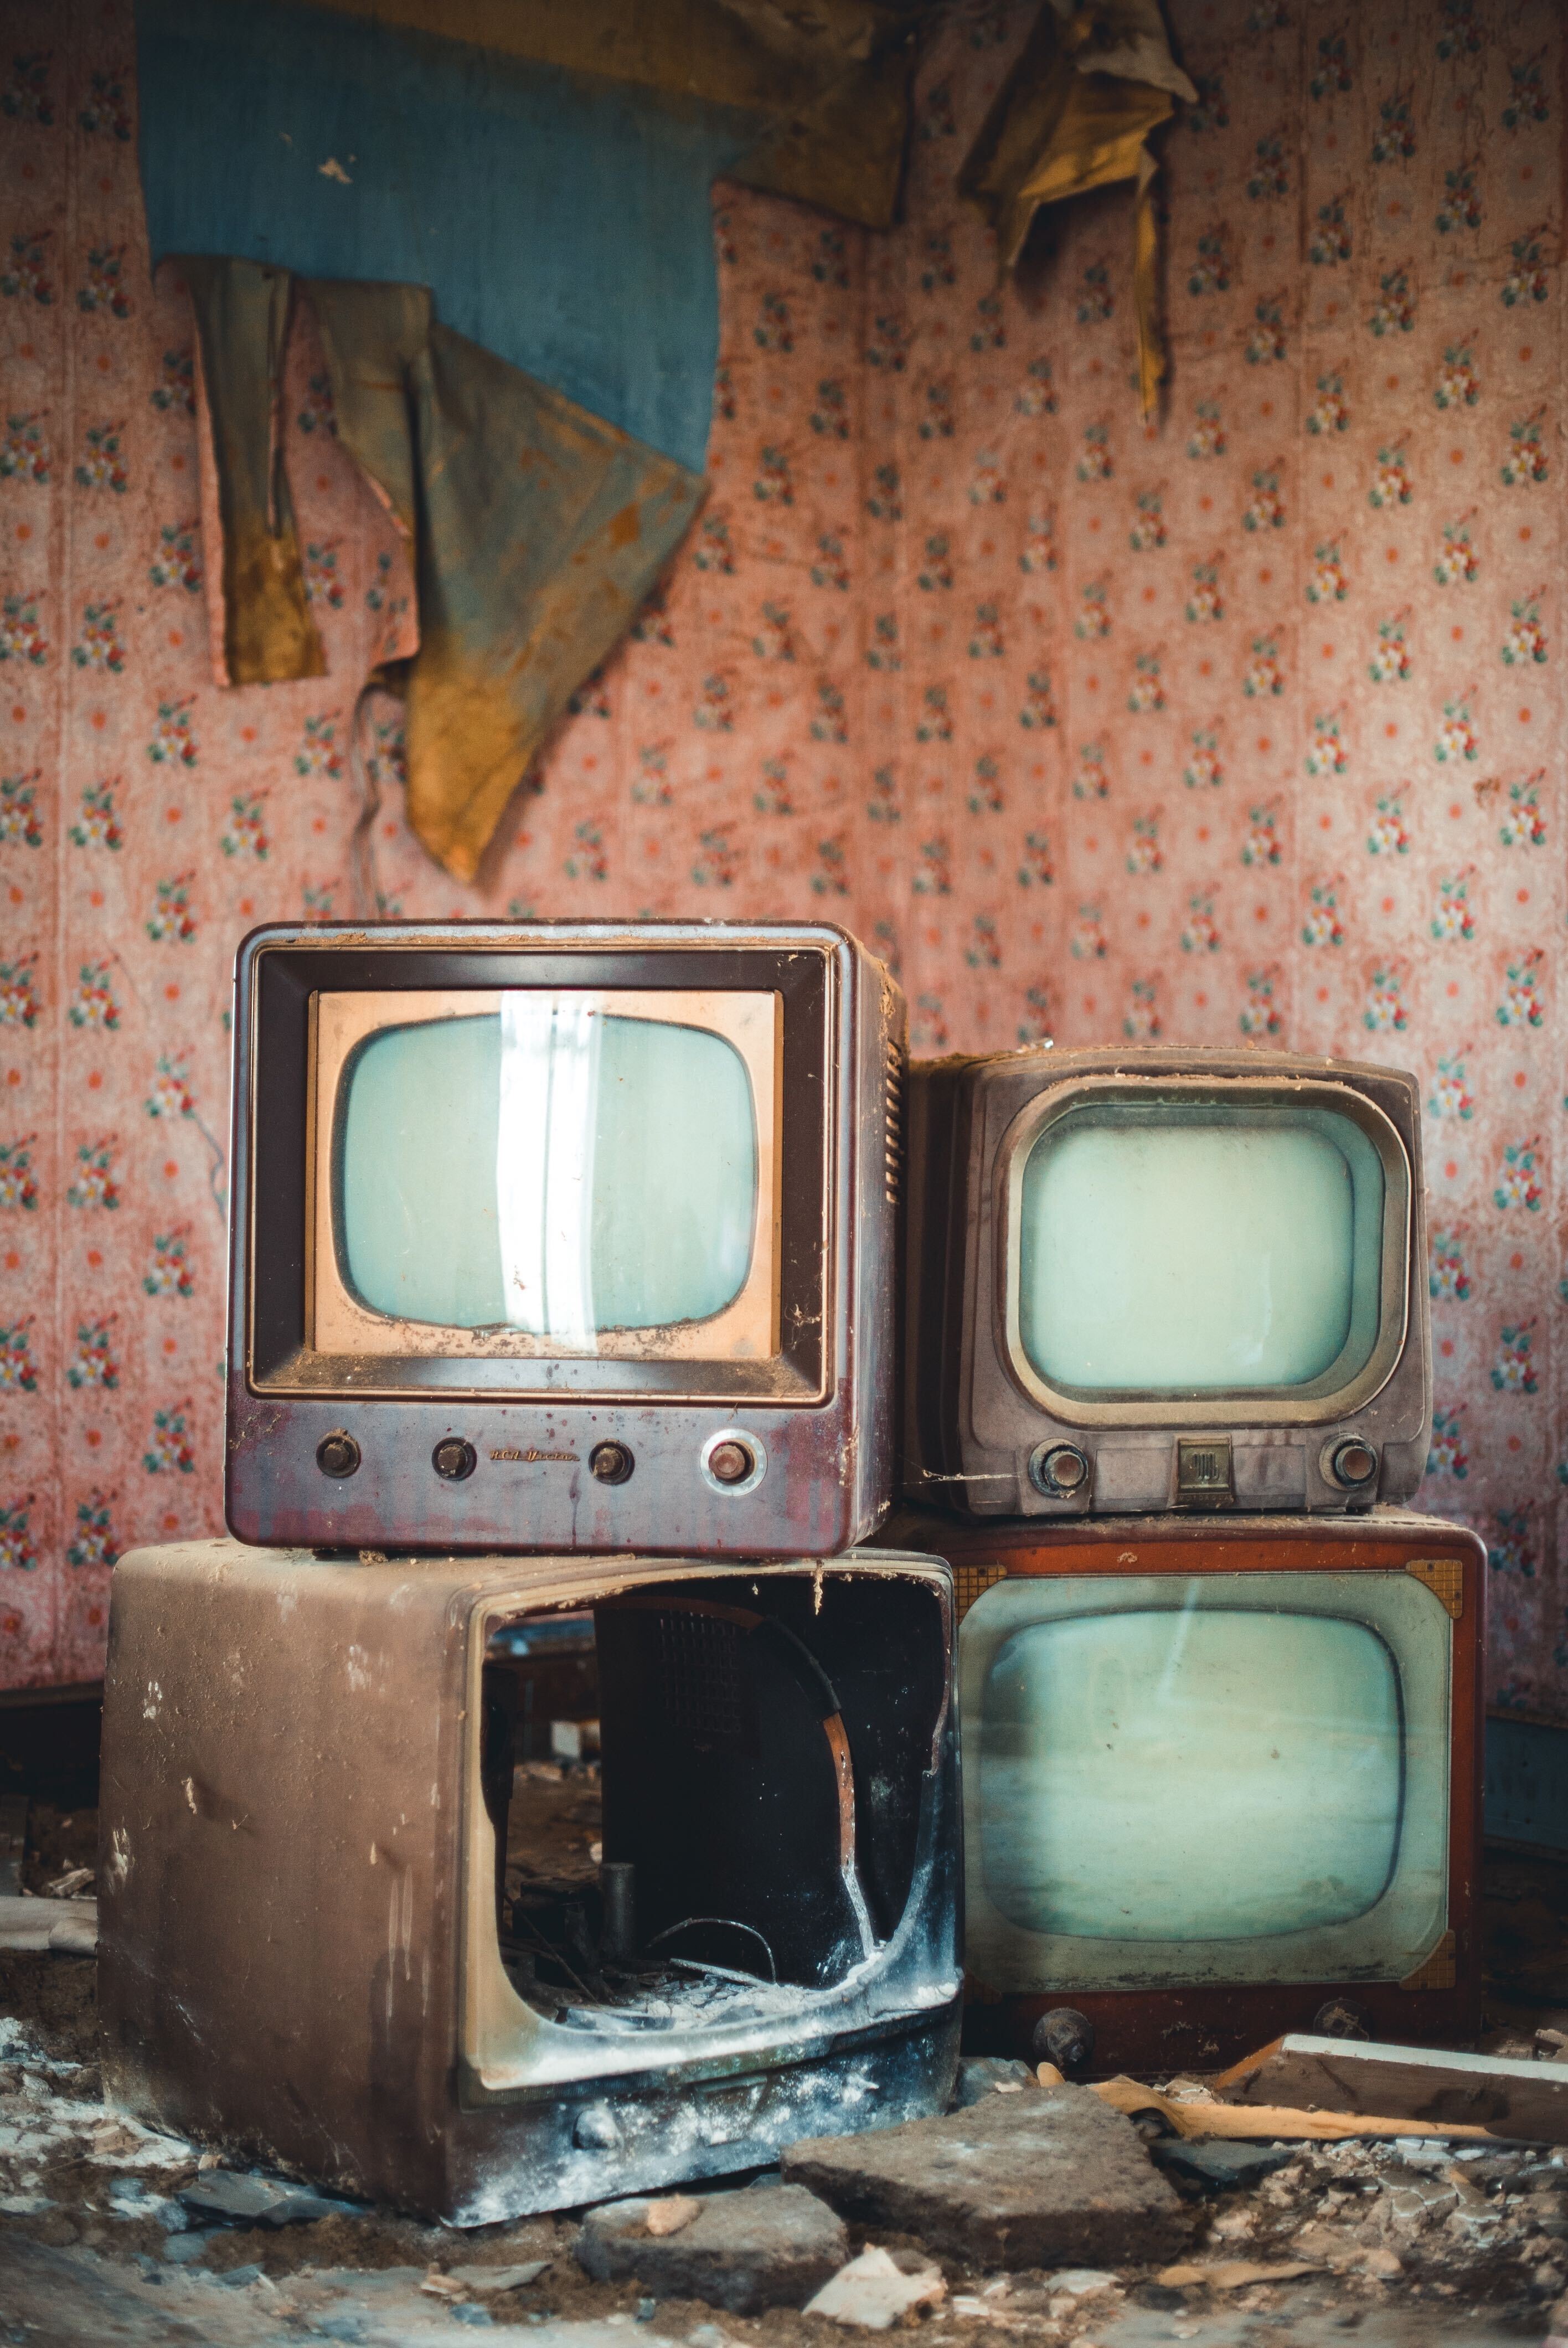 Vintage destroyed TVs with distressed wallpaper in background